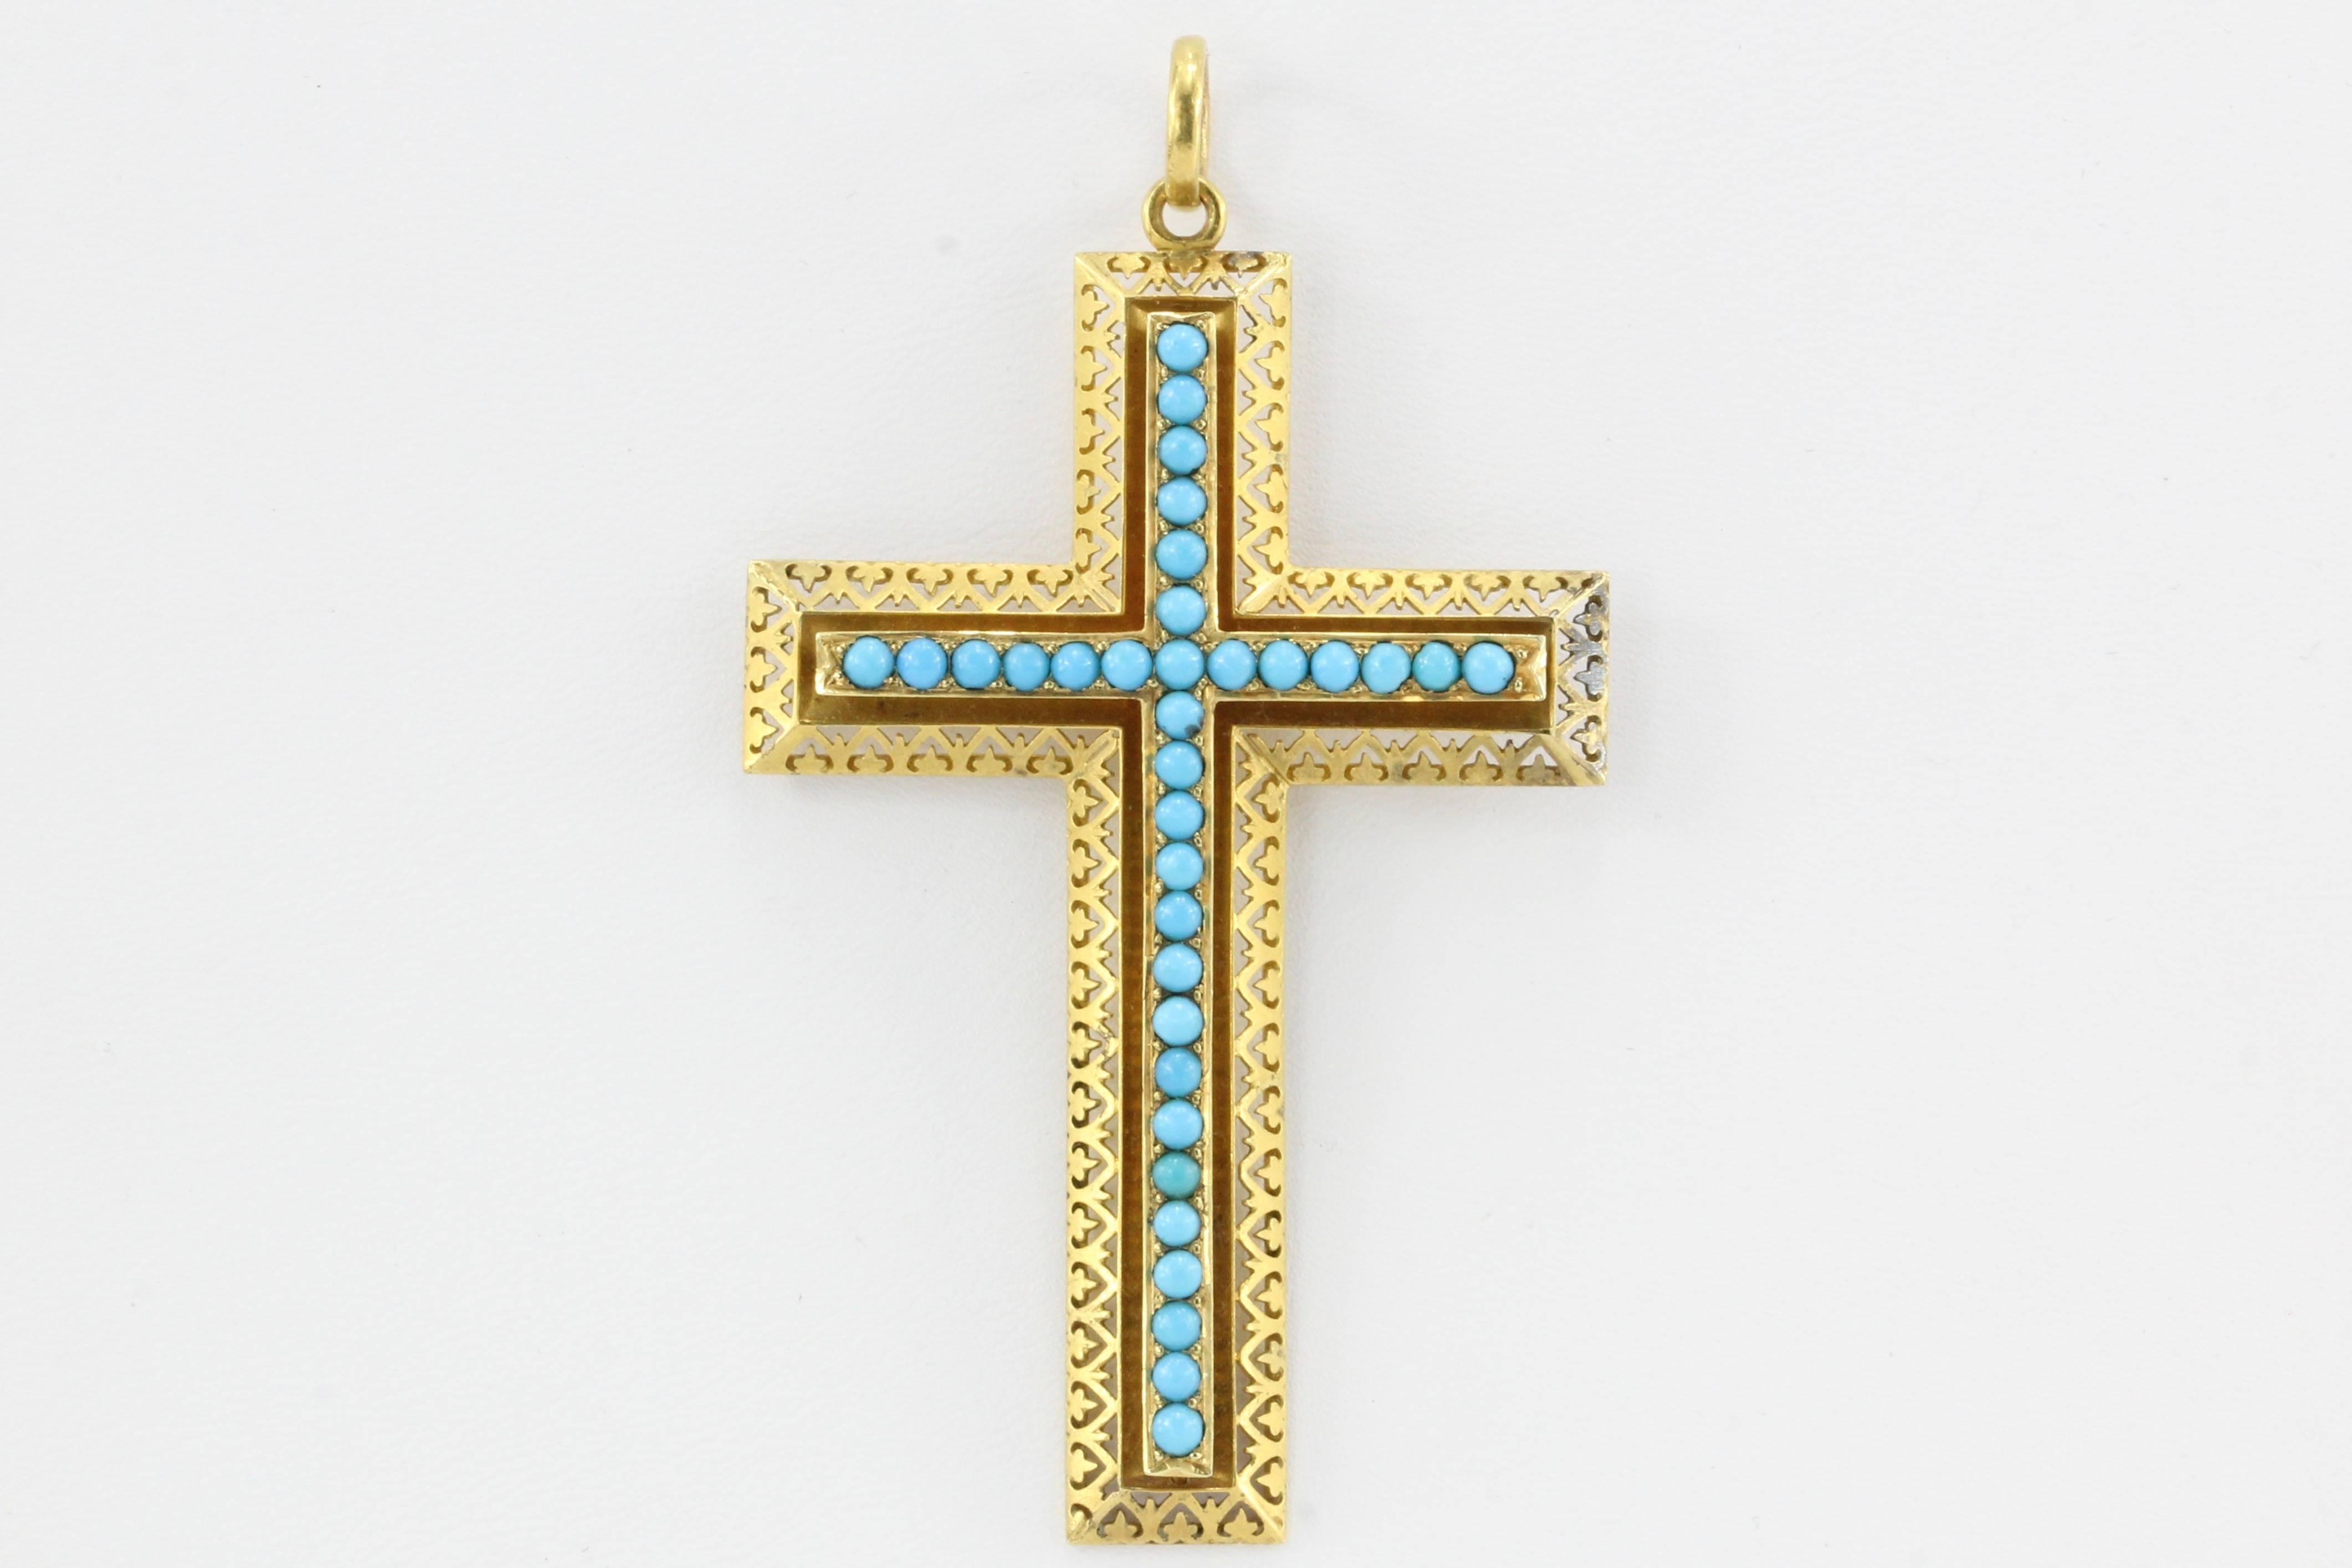 Victorian 15K Gold Persian Turquoise Pierced Cross Pendant c.1880 in Box

Era: Late Victorian c.1880

Maker: S. Brighton & Co of Buxton England

Composition: 15K Yellow Gold

Primary Stone: Persian Turquoise

Pendant Measurement: 2.5"